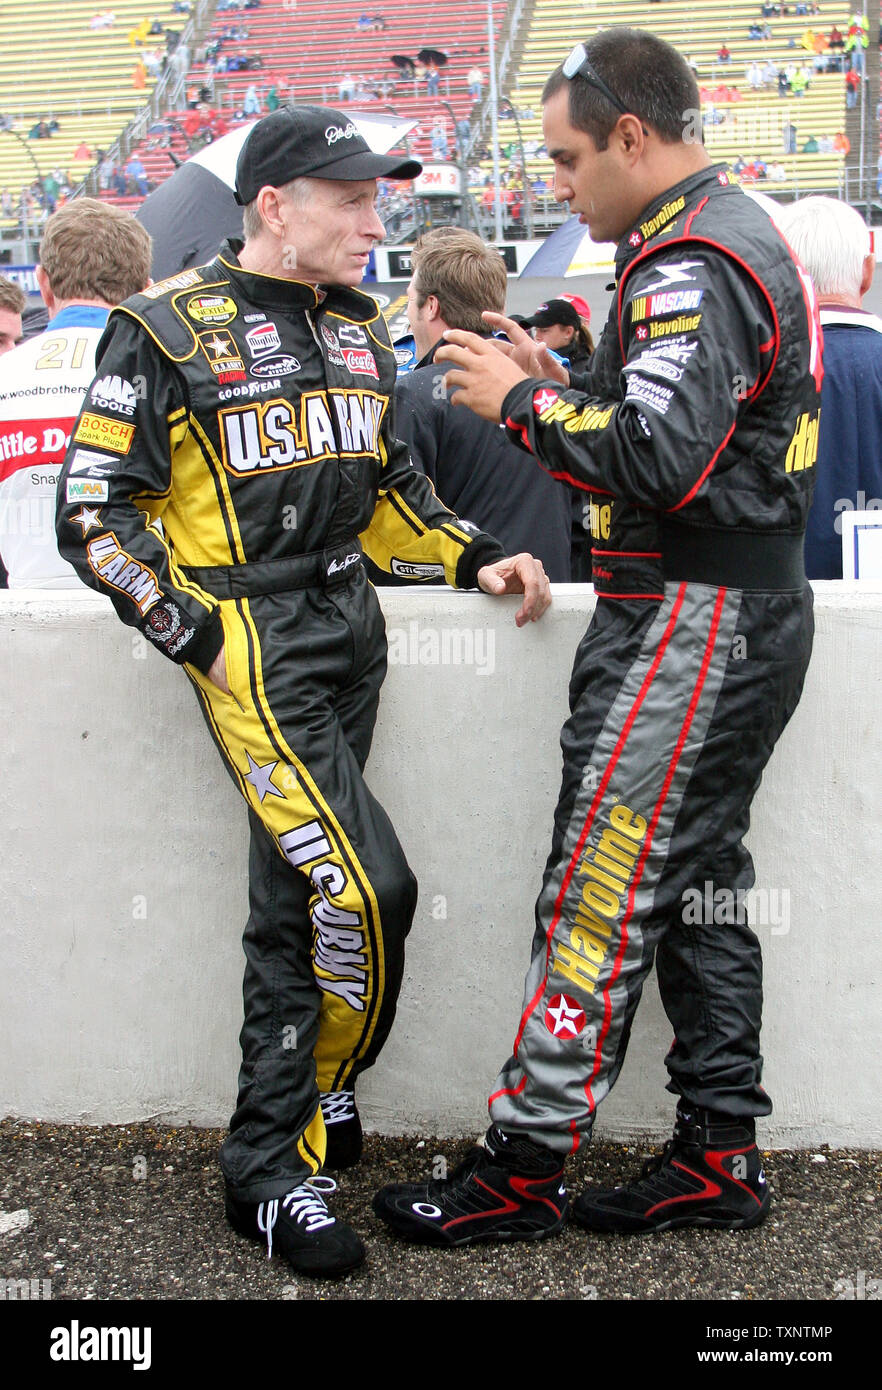 Nascar drivers Mark Martin, left, and Juan Pablo Montoya chat during driver introductions for the 3M Performance 400 at the Michigan International Speedway in Brooklyn, Michigan on August 19, 2007.  The race was postponed due to continuous rain at the track.  (UPI Photo/Scott R. Galvin) Stock Photo